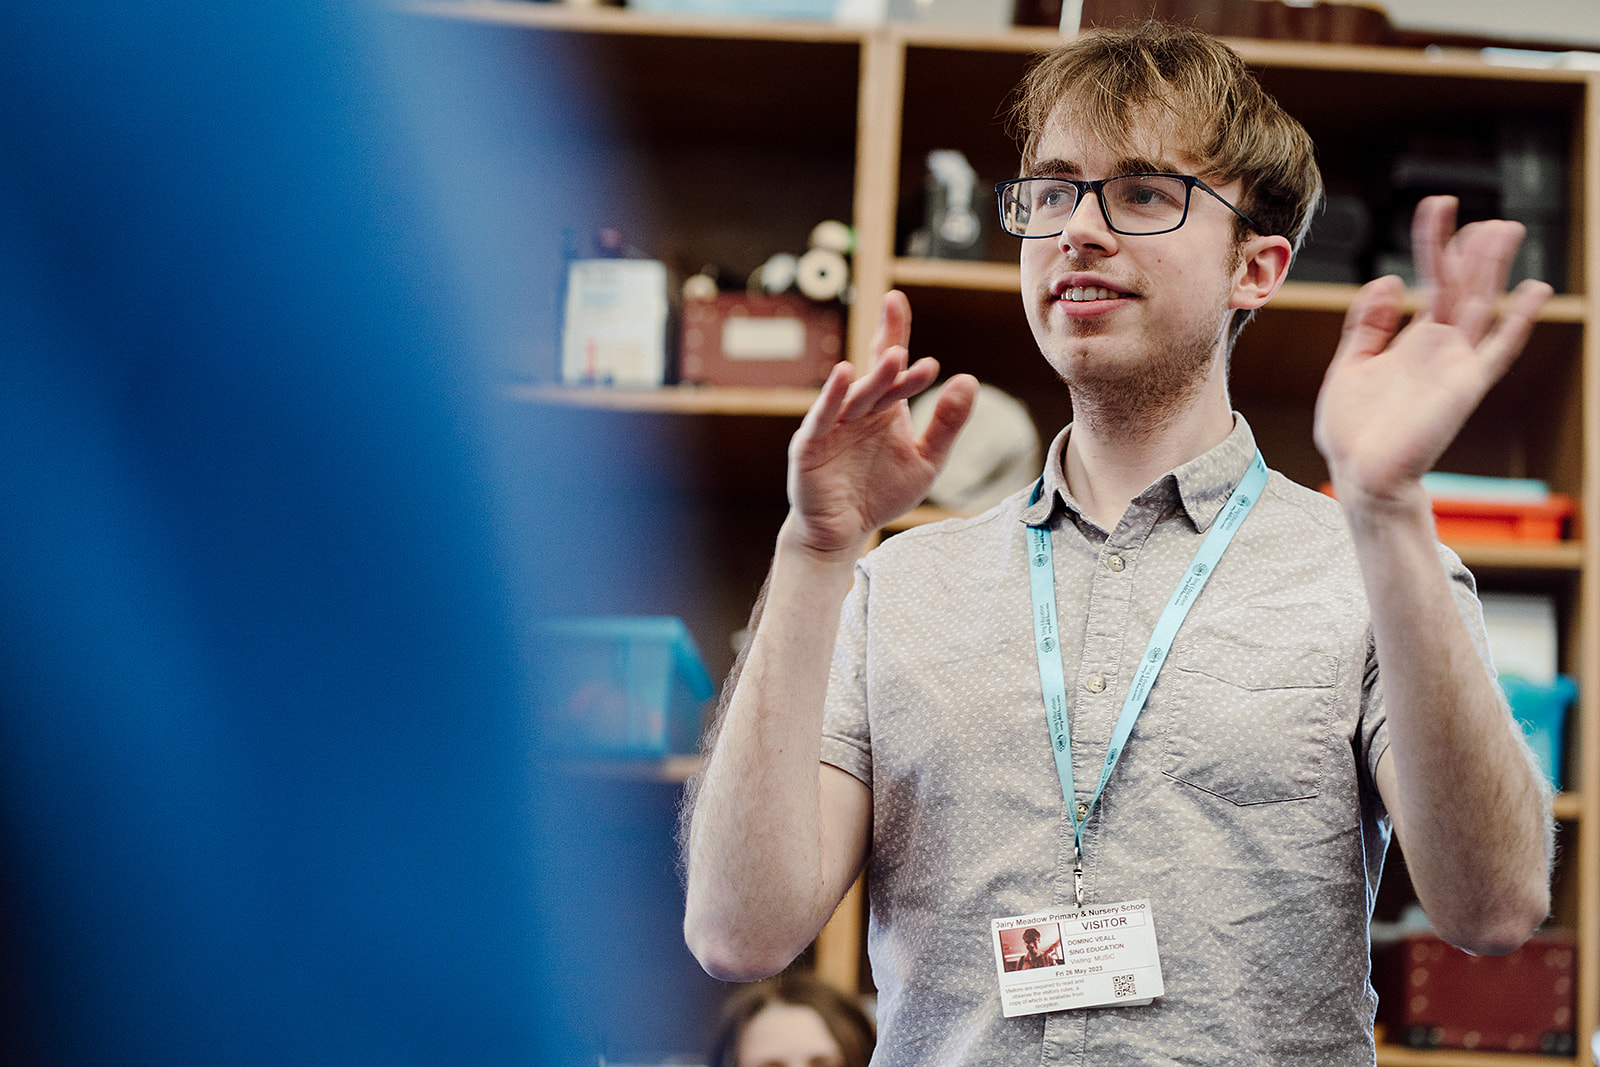 A young male educator with glasses is captured mid-gesture, likely leading a classroom activity or discussion. He's wearing a visitor badge, indicating he might be a guest teacher or specialist. The blurred foreground suggests a student's perspective, adding a sense of engagement and focus on the educator. The classroom setting is indicated by shelves with various items in the background, creating an educational atmosphere.